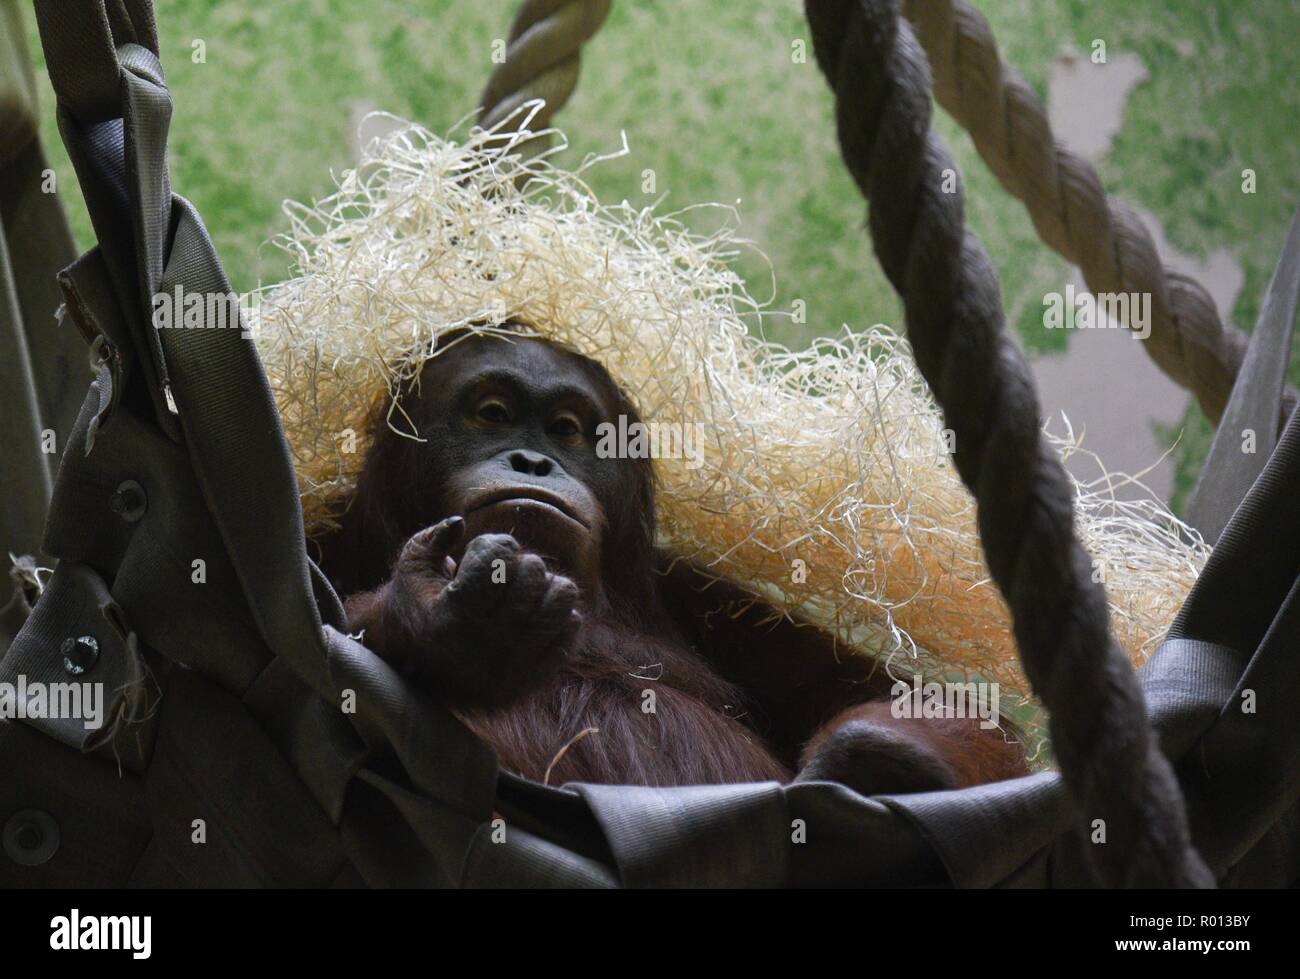 October 26, 2018 - Paris, France: An orang-outan with straw on her head at the zoo of the French National Museum of Natural History. Une orang-outan avec de la paille sur sa tete a la menagerie du Jardin des Plantes. *** FRANCE OUT / NO SALES TO FRENCH MEDIA *** Stock Photo